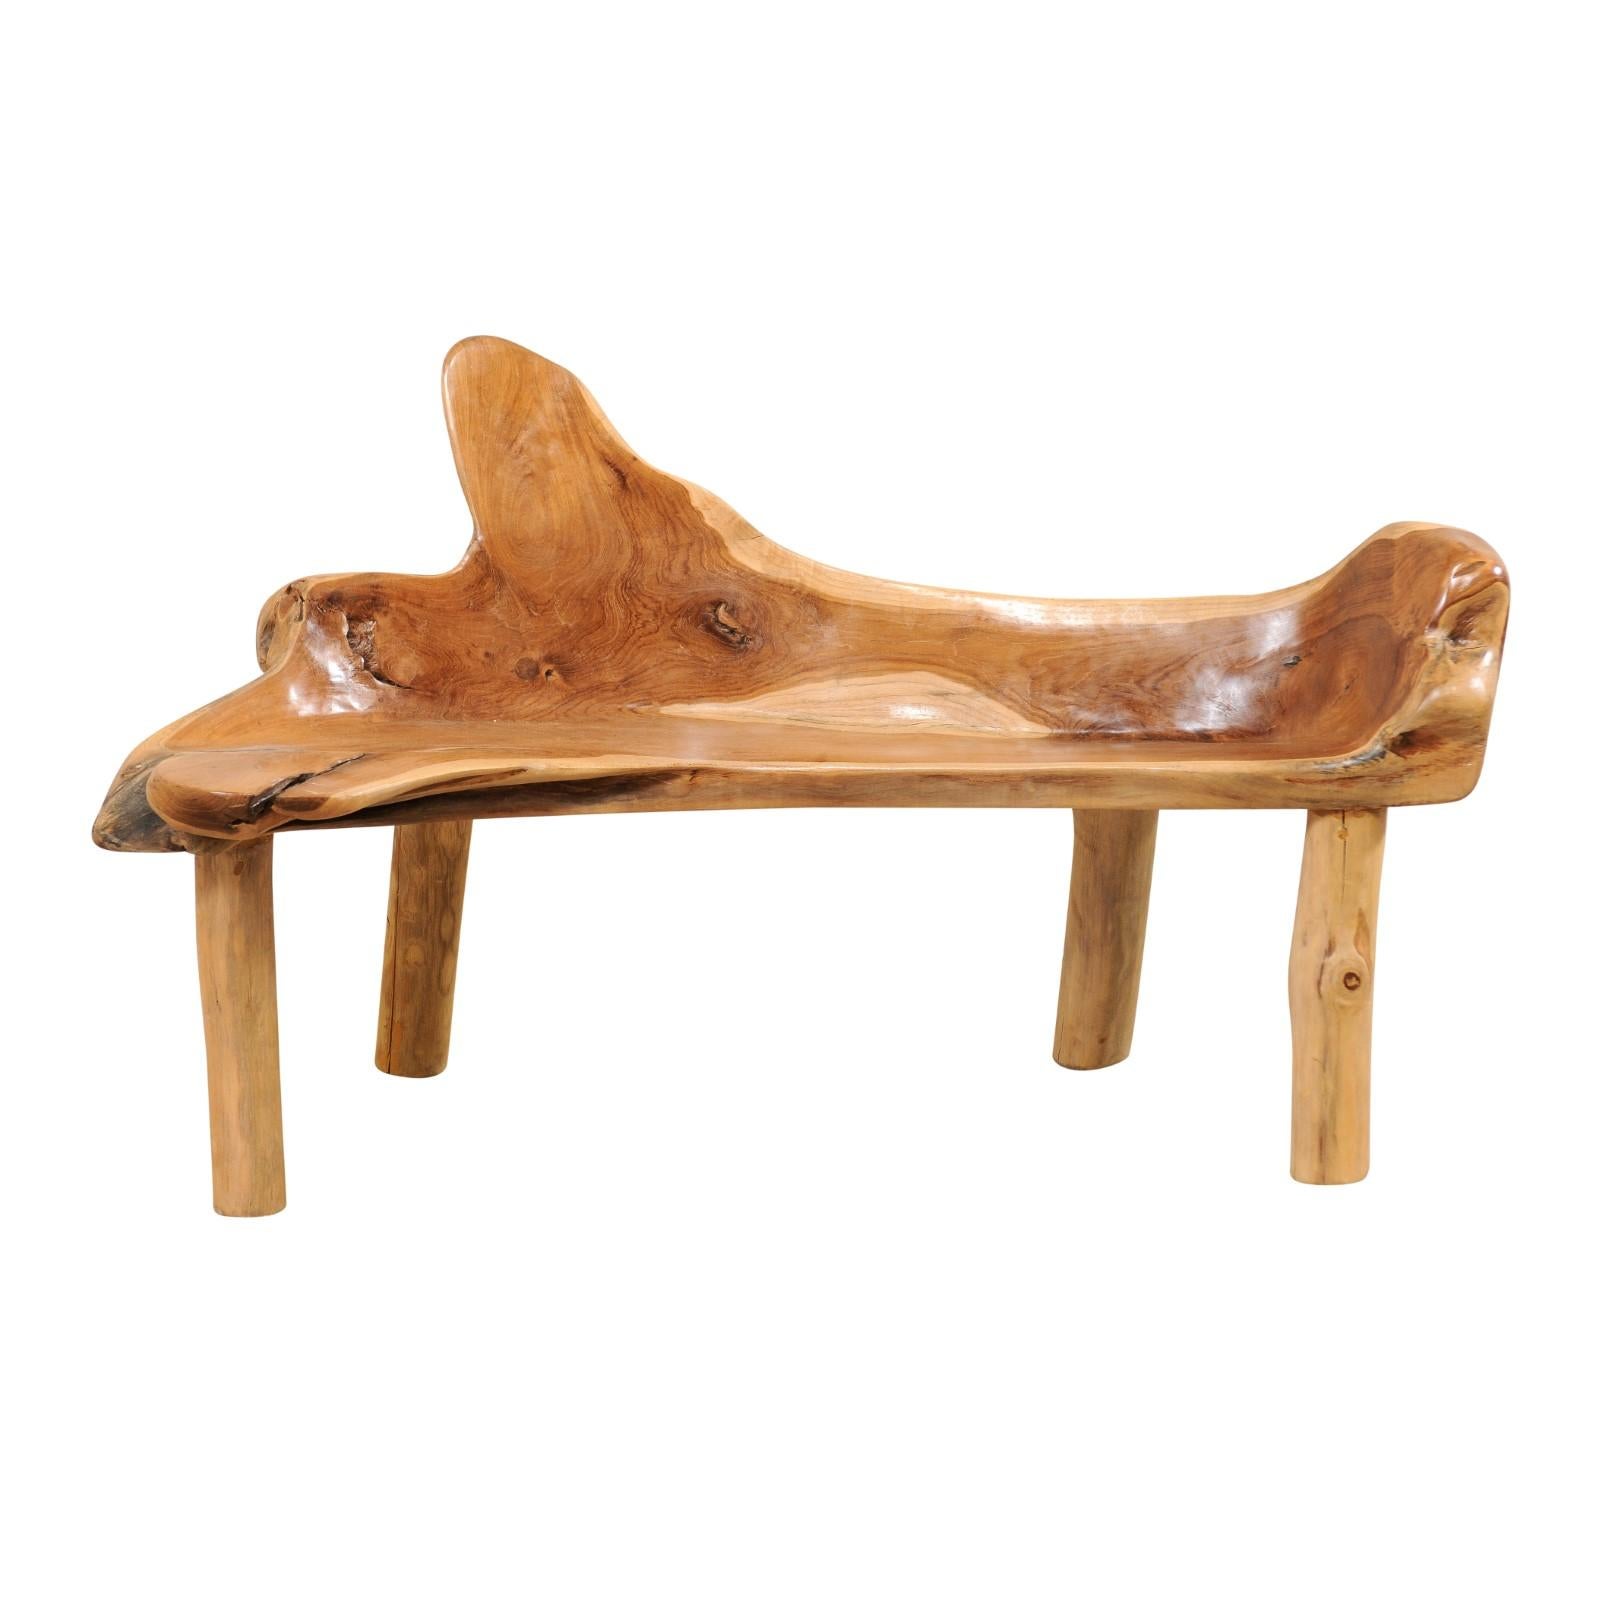 Natural Teak Wood Bench with Live Edge and Organic Shape